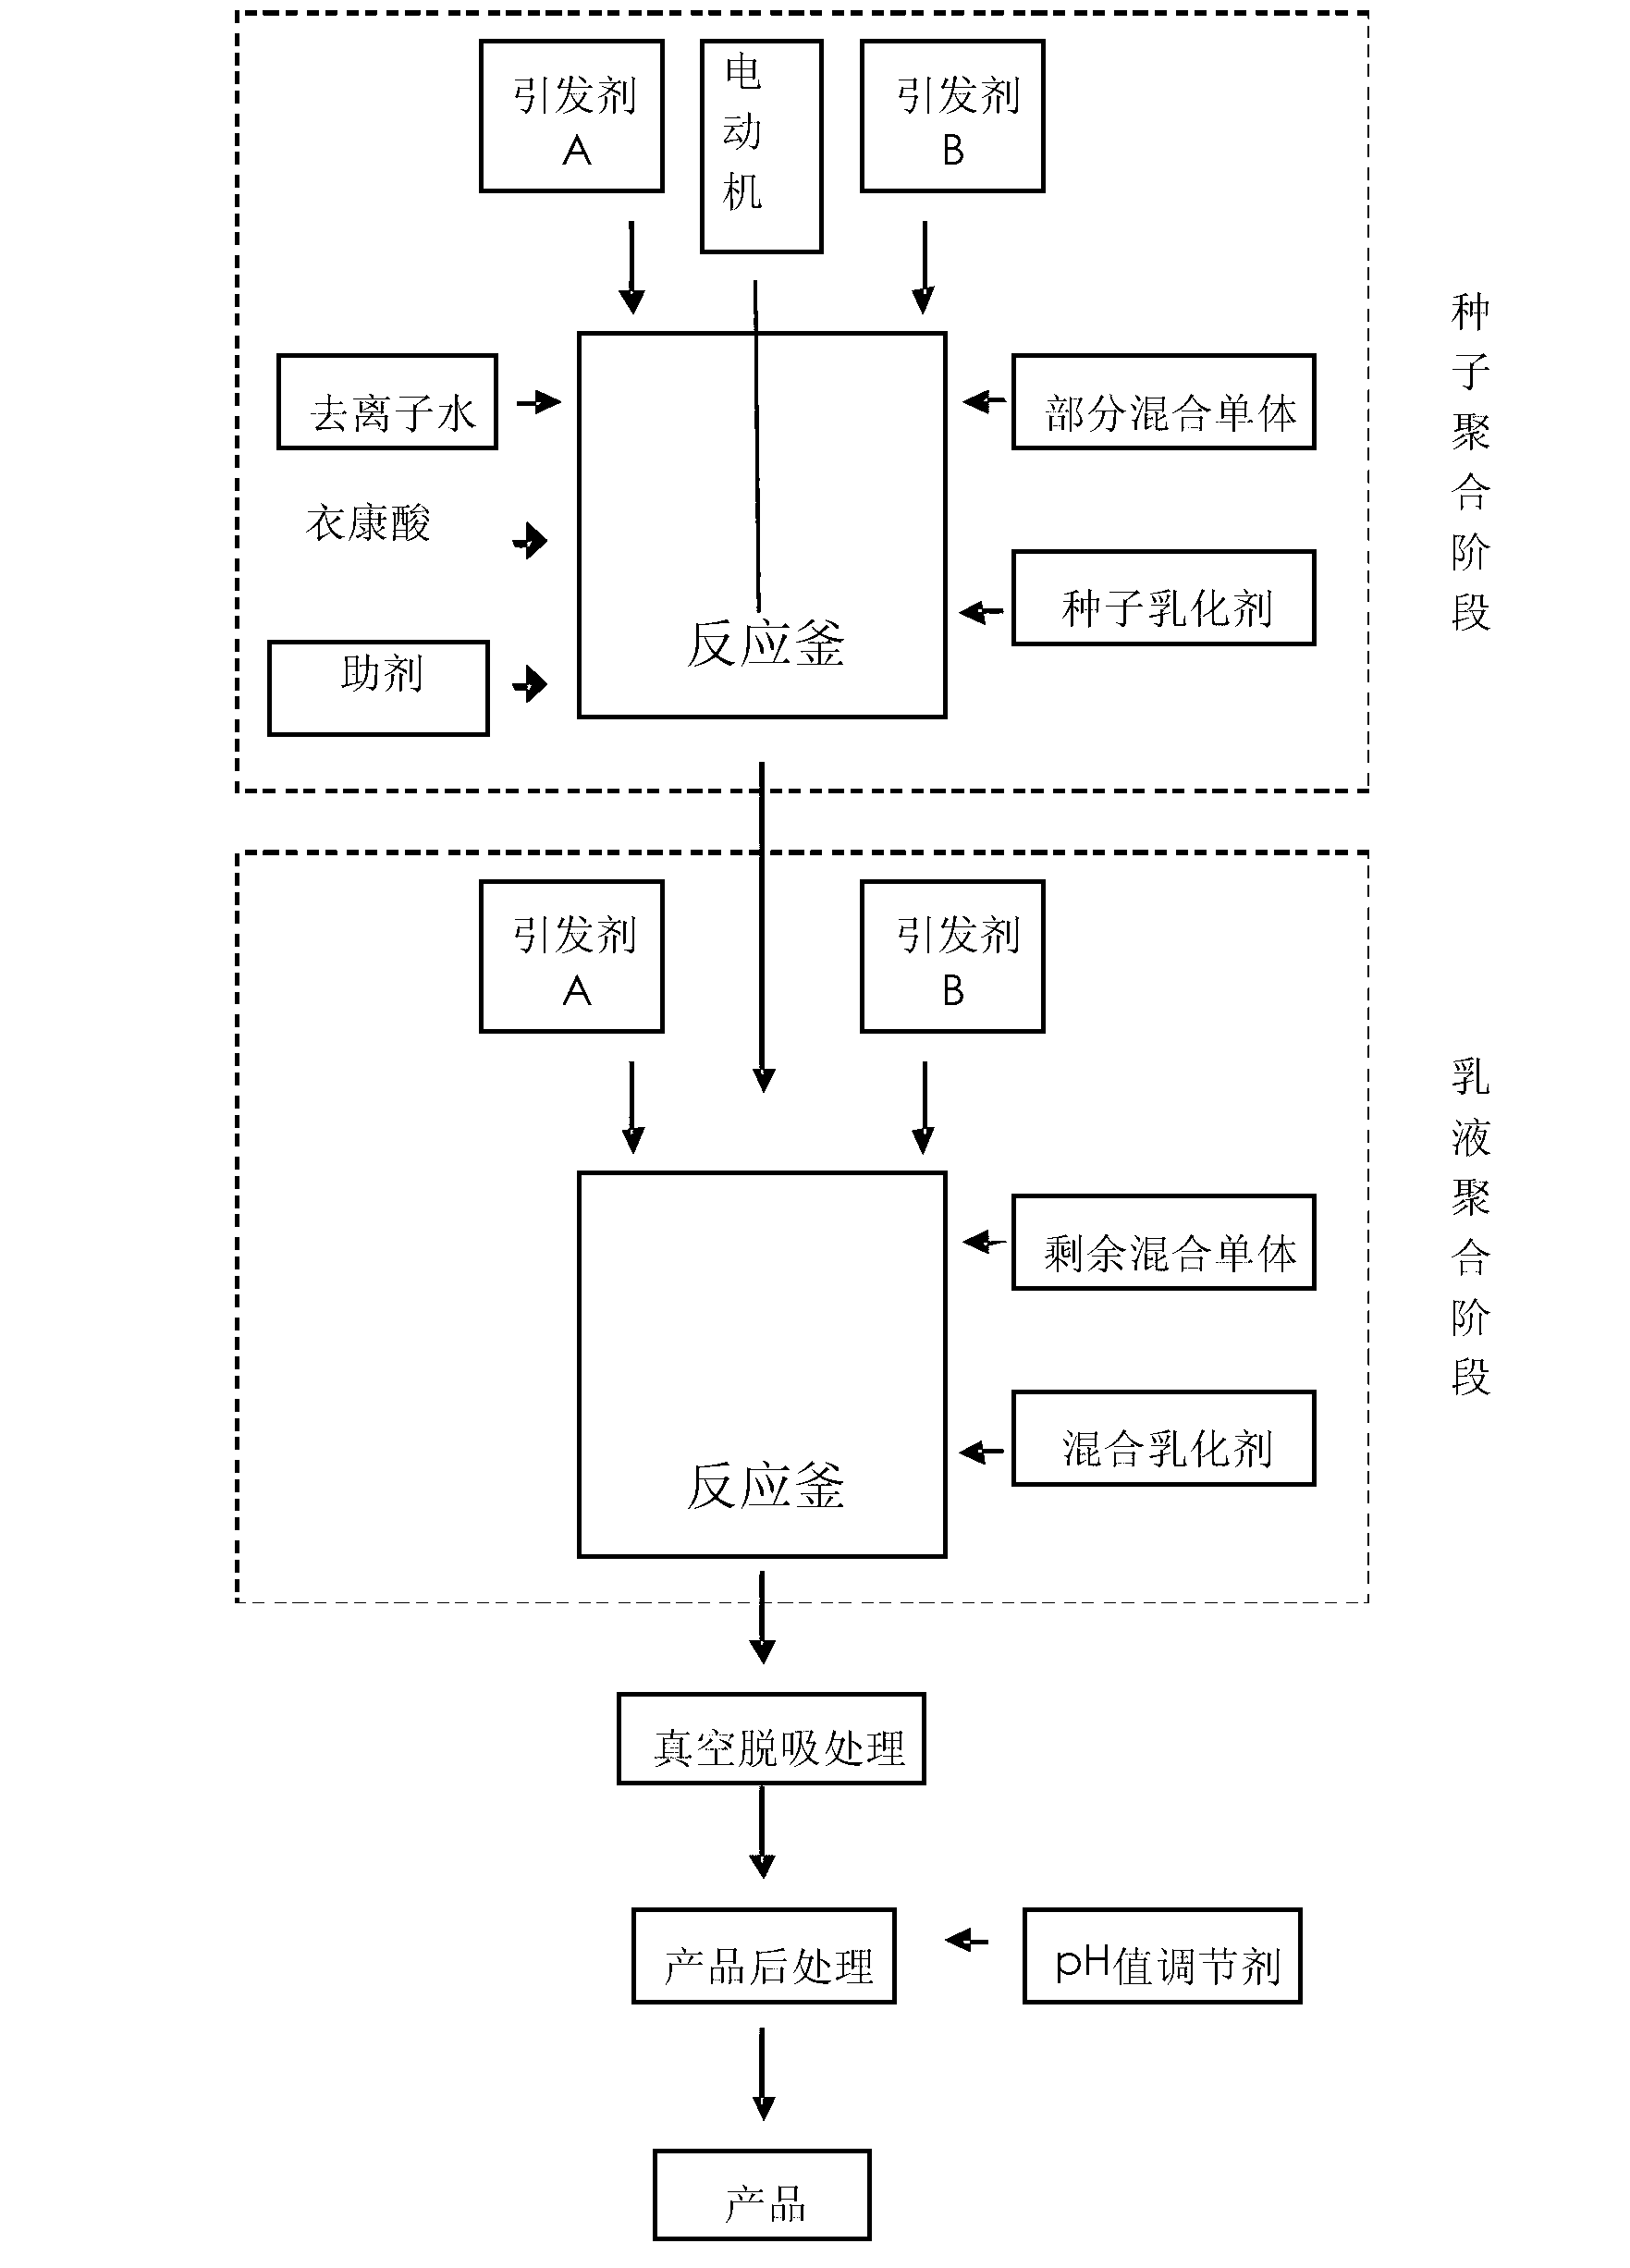 Polyvinyl dichloride (PVDC) emulsion for cellophane coating and preparation method thereof and application thereof